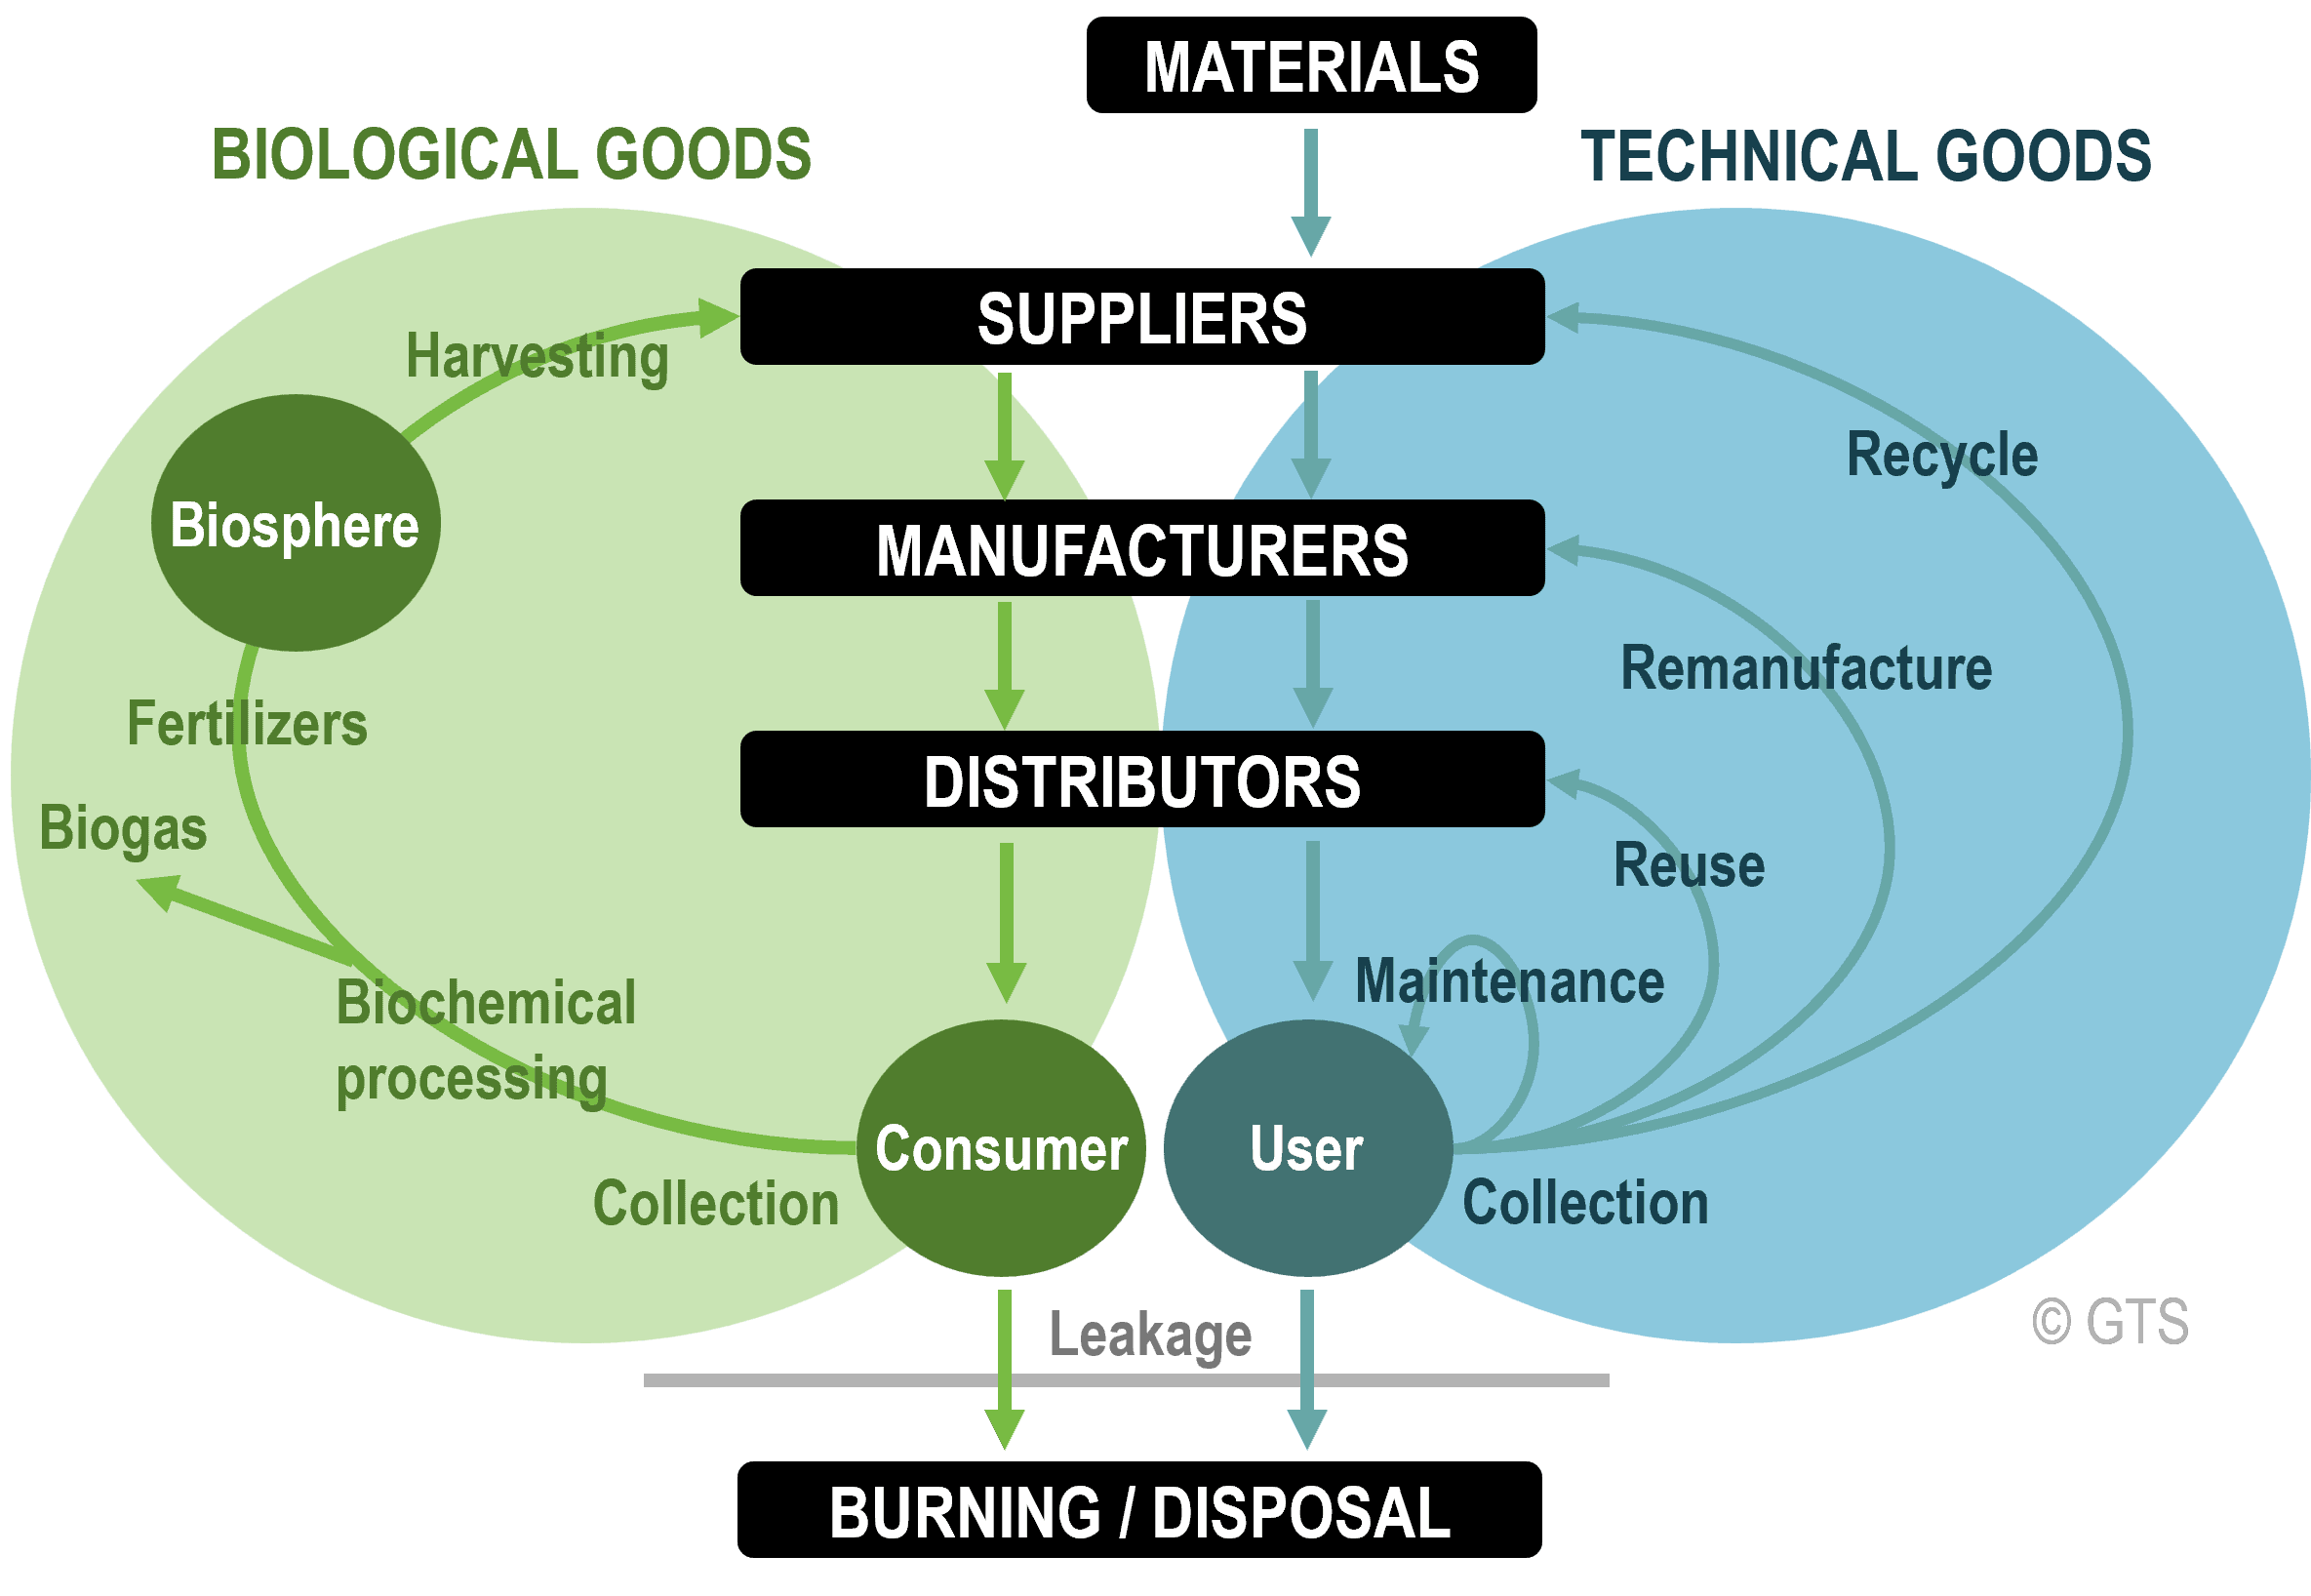 III. Importance of Green Energy in Circular Supply Chains and Manufacturing